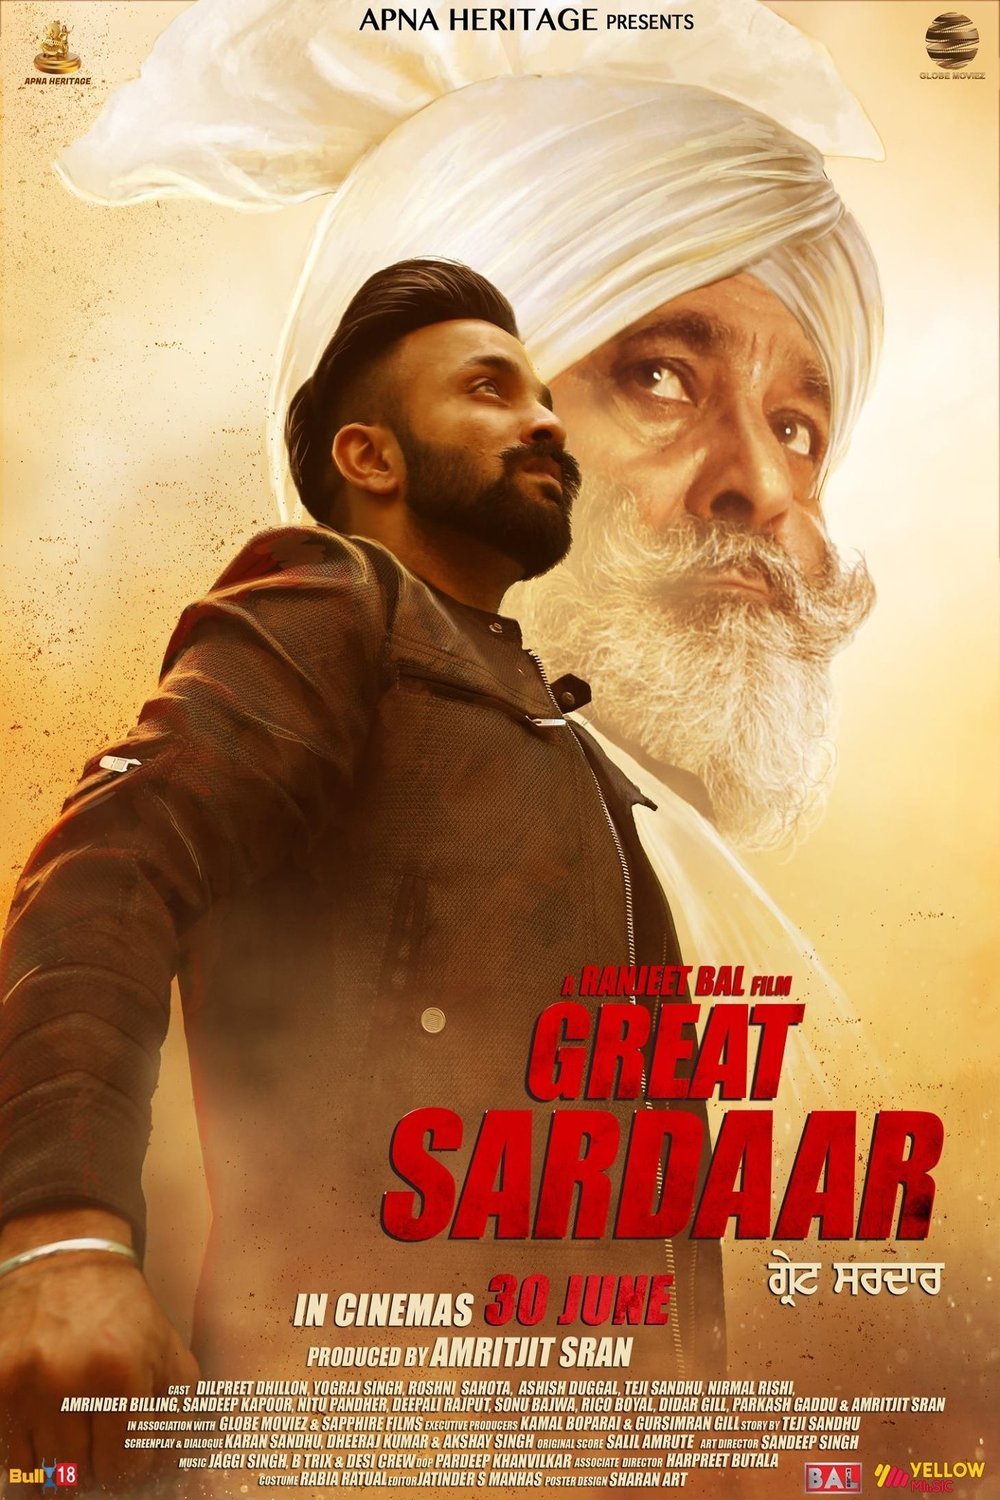 Poster of the movie The Great Sardaar